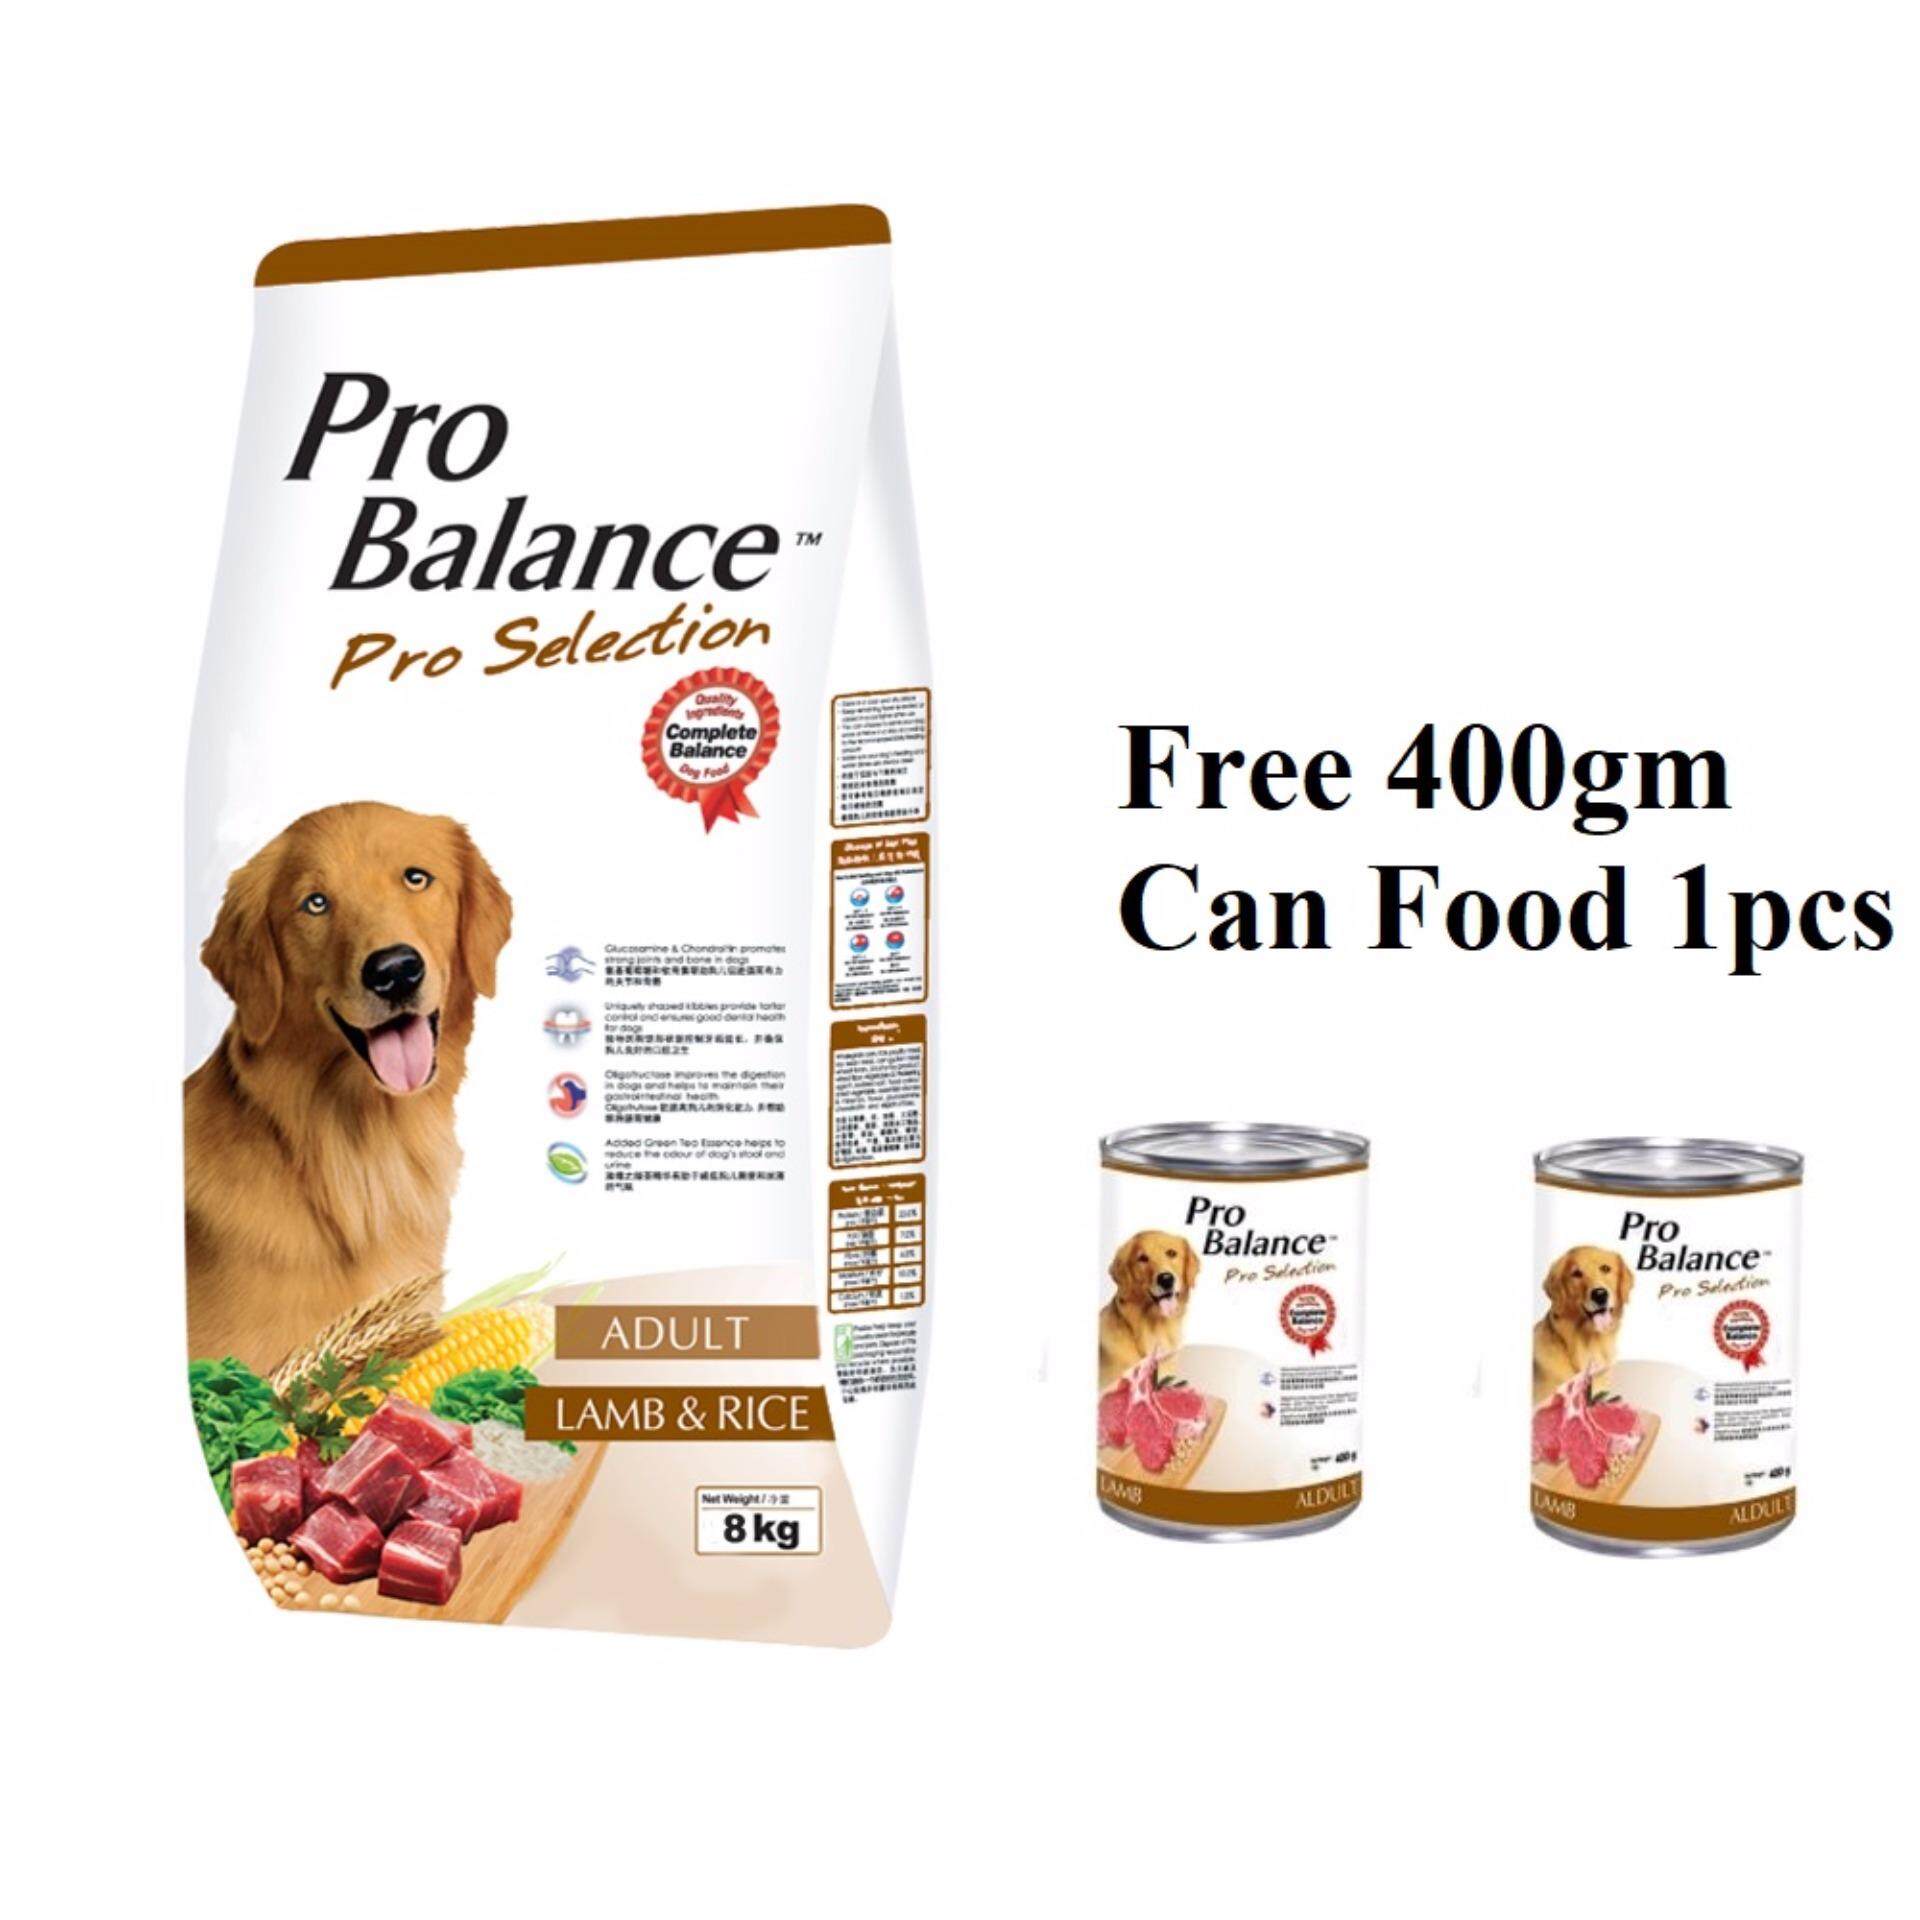 Malaysia Online Pet Store Selling Dog Food